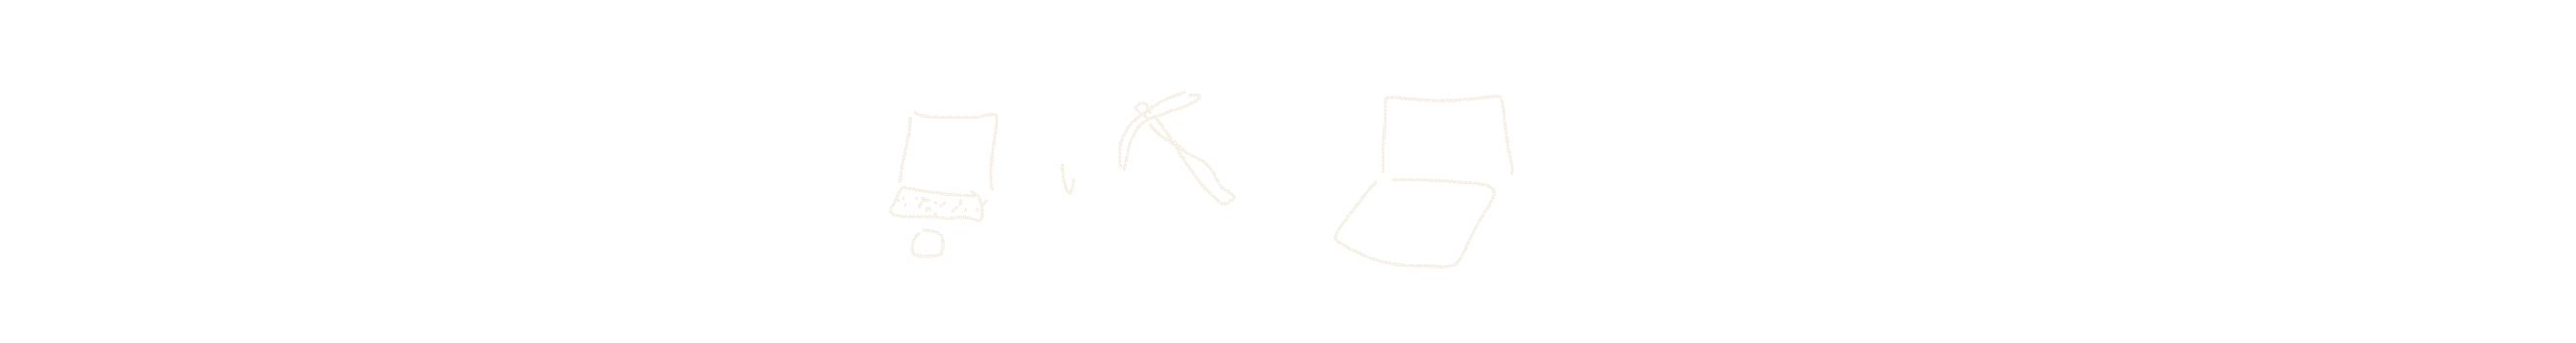 Crude drawings of a computer, pickaxe, and laptop.